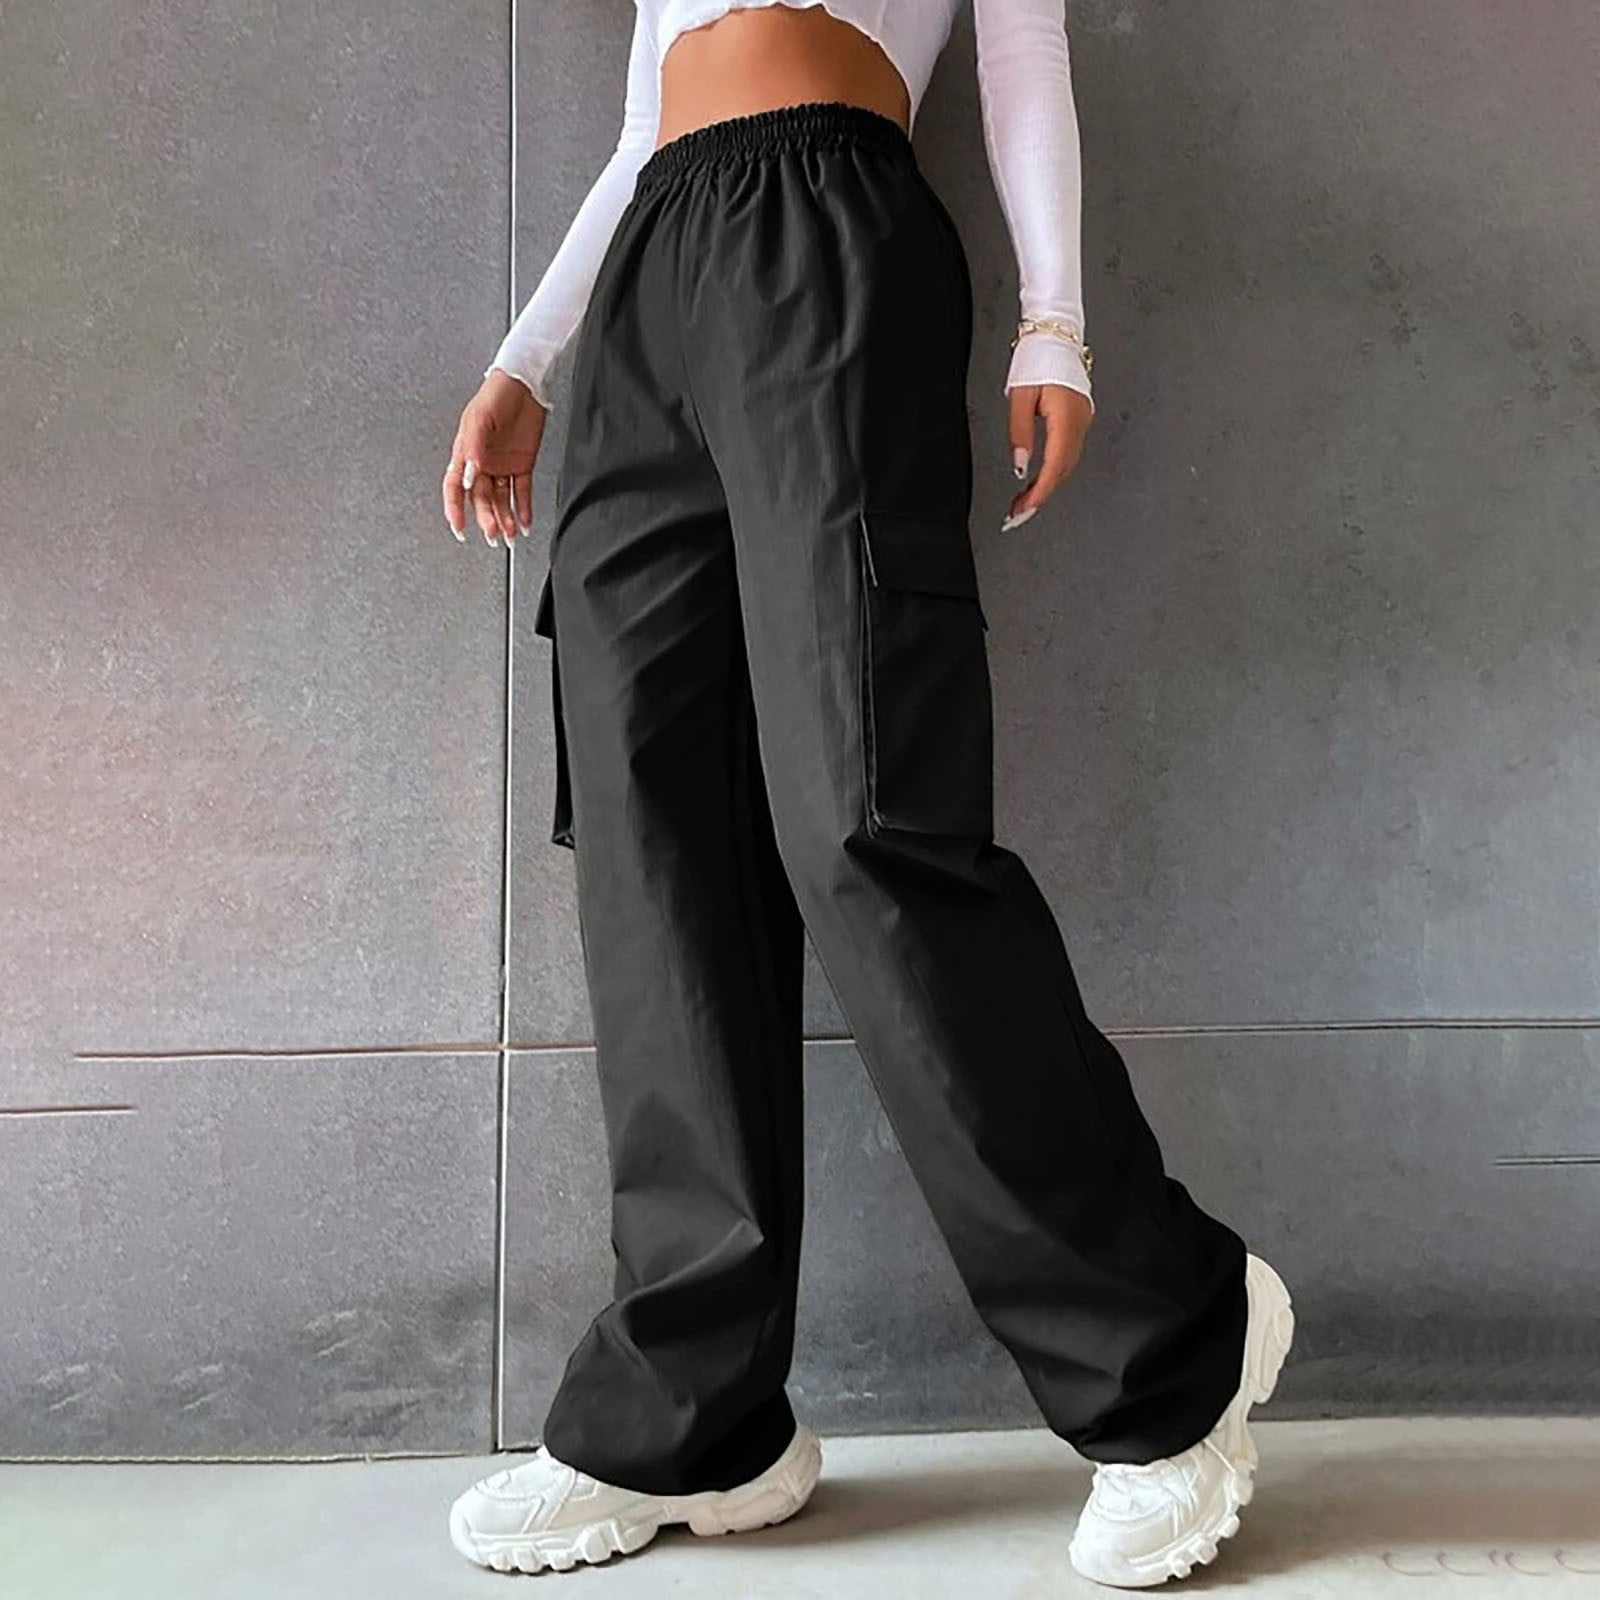 KIJBLAE Women's Bottoms Fashion Full Length Trousers Cargo Pants For Girls  Color Block Comfy Lounge Casual Pants Black L 